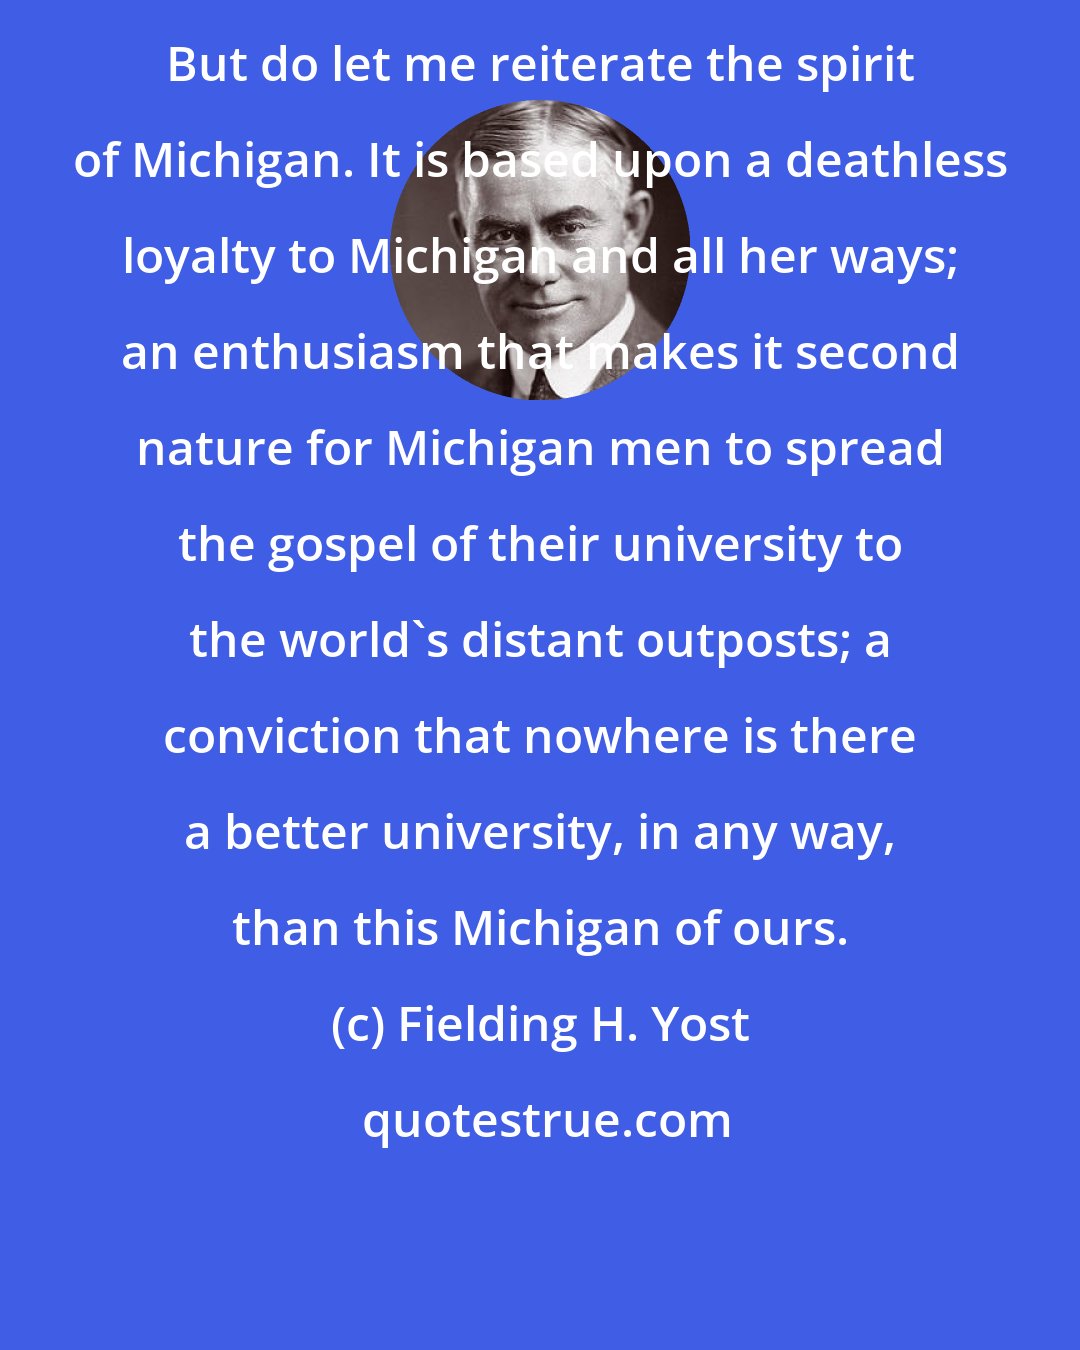 Fielding H. Yost: But do let me reiterate the spirit of Michigan. It is based upon a deathless loyalty to Michigan and all her ways; an enthusiasm that makes it second nature for Michigan men to spread the gospel of their university to the world's distant outposts; a conviction that nowhere is there a better university, in any way, than this Michigan of ours.